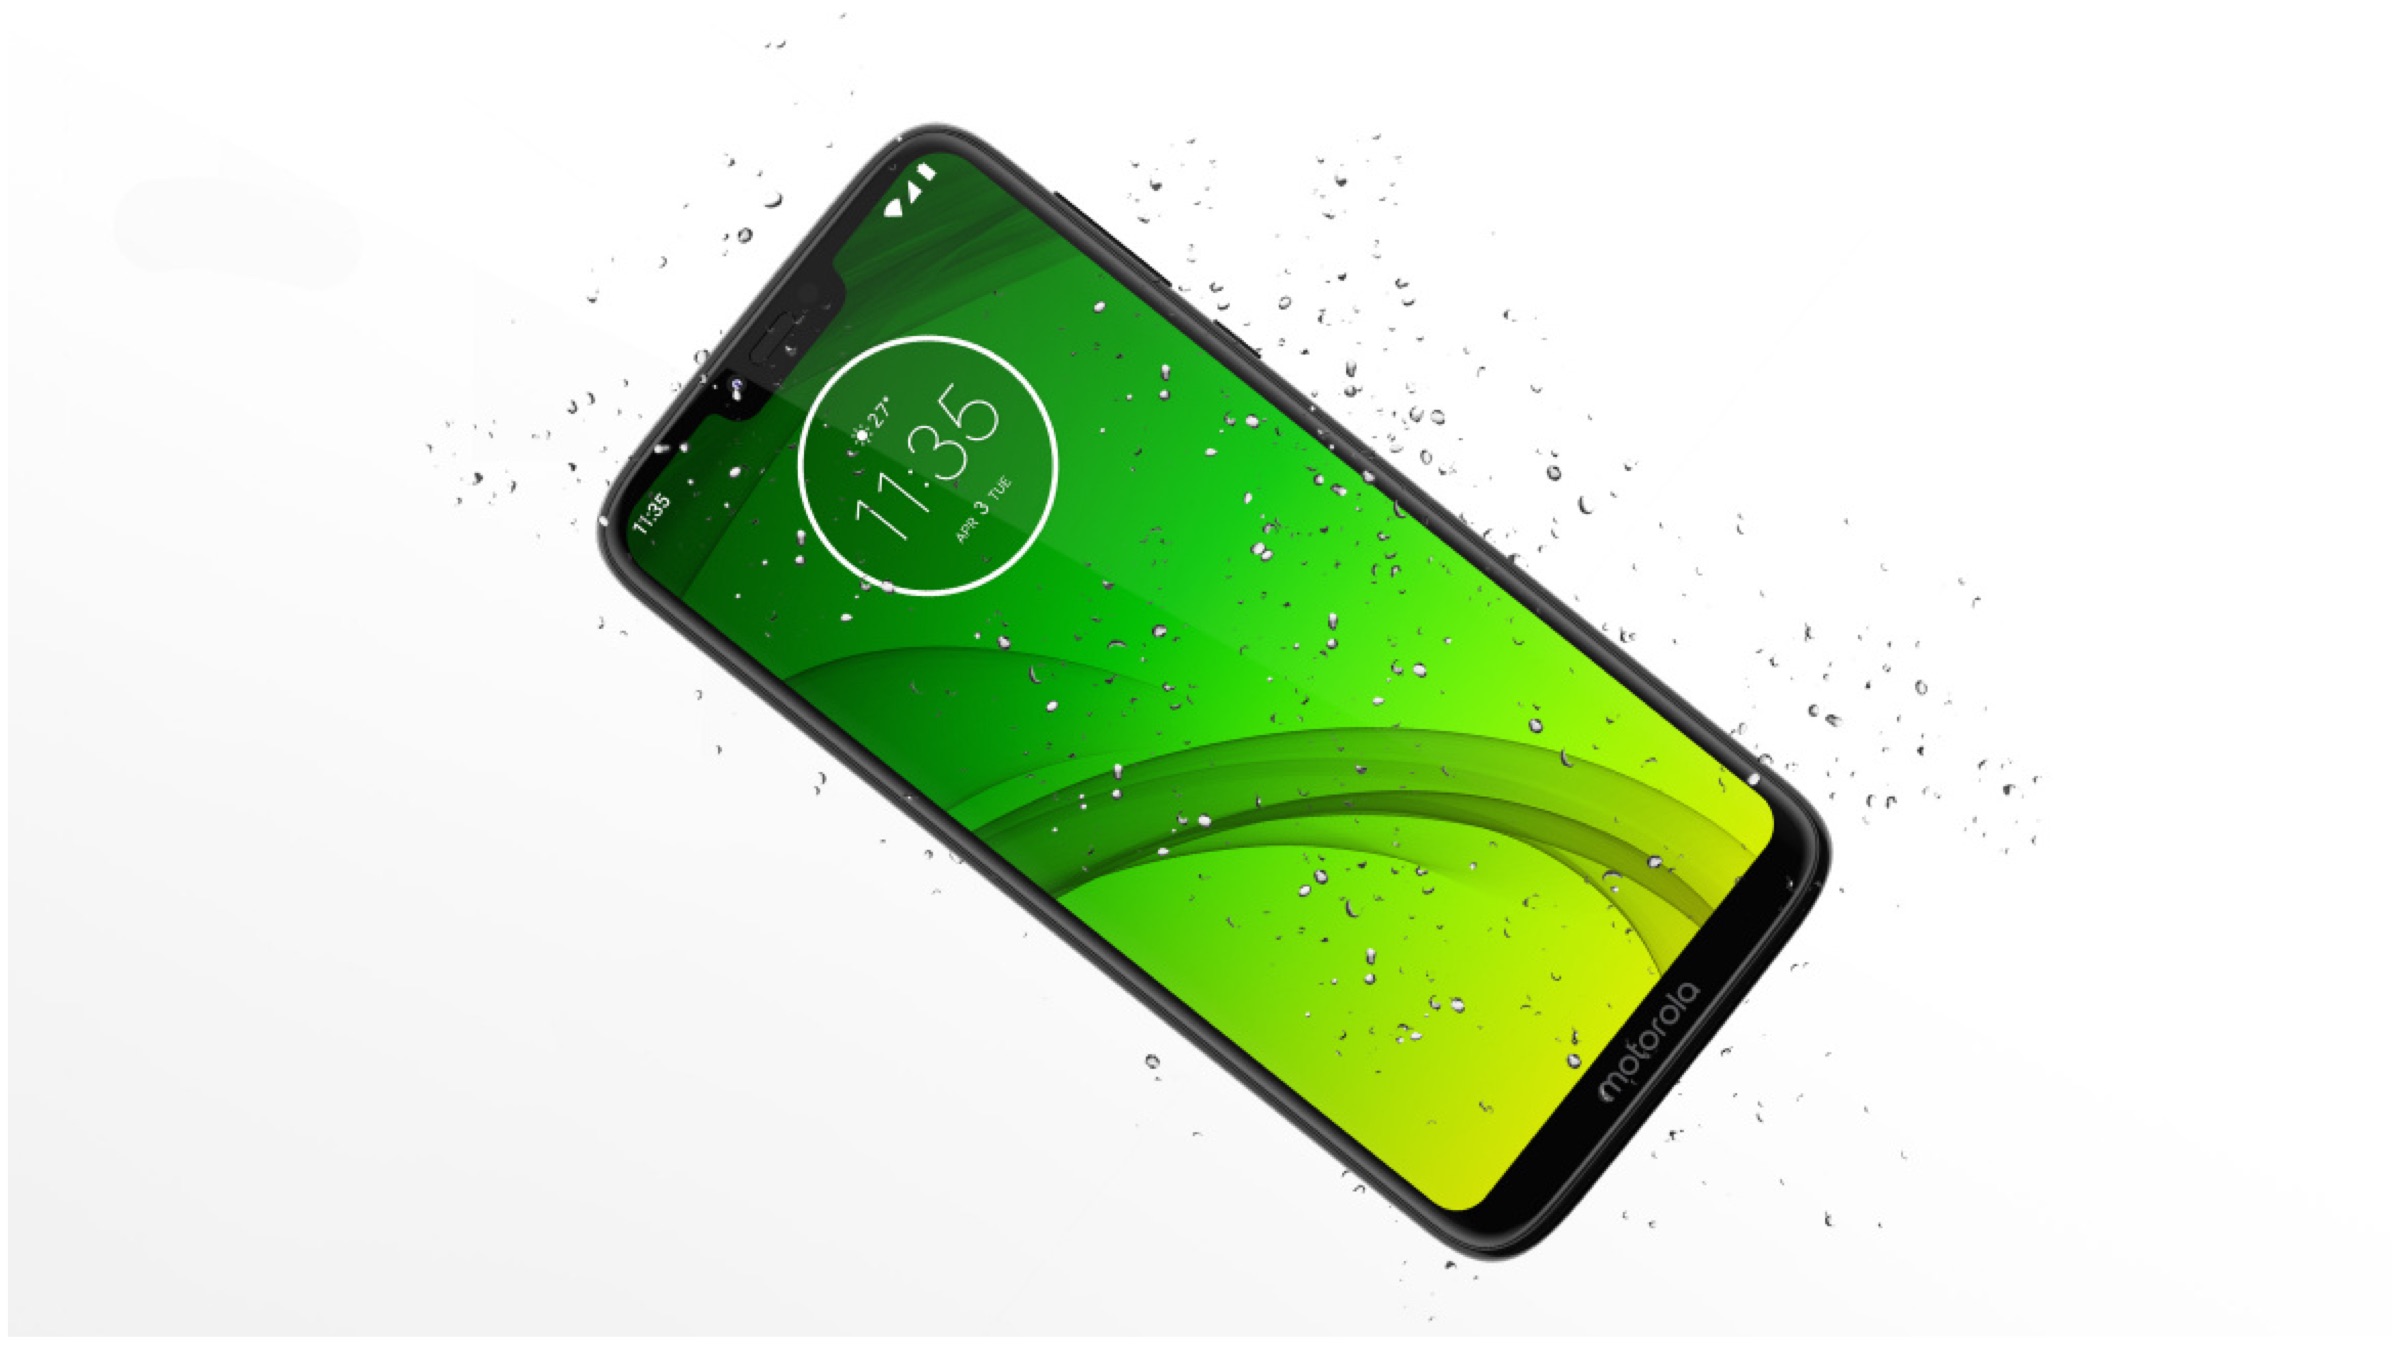 Moto G7 Power; Price, Specifications and Full Details